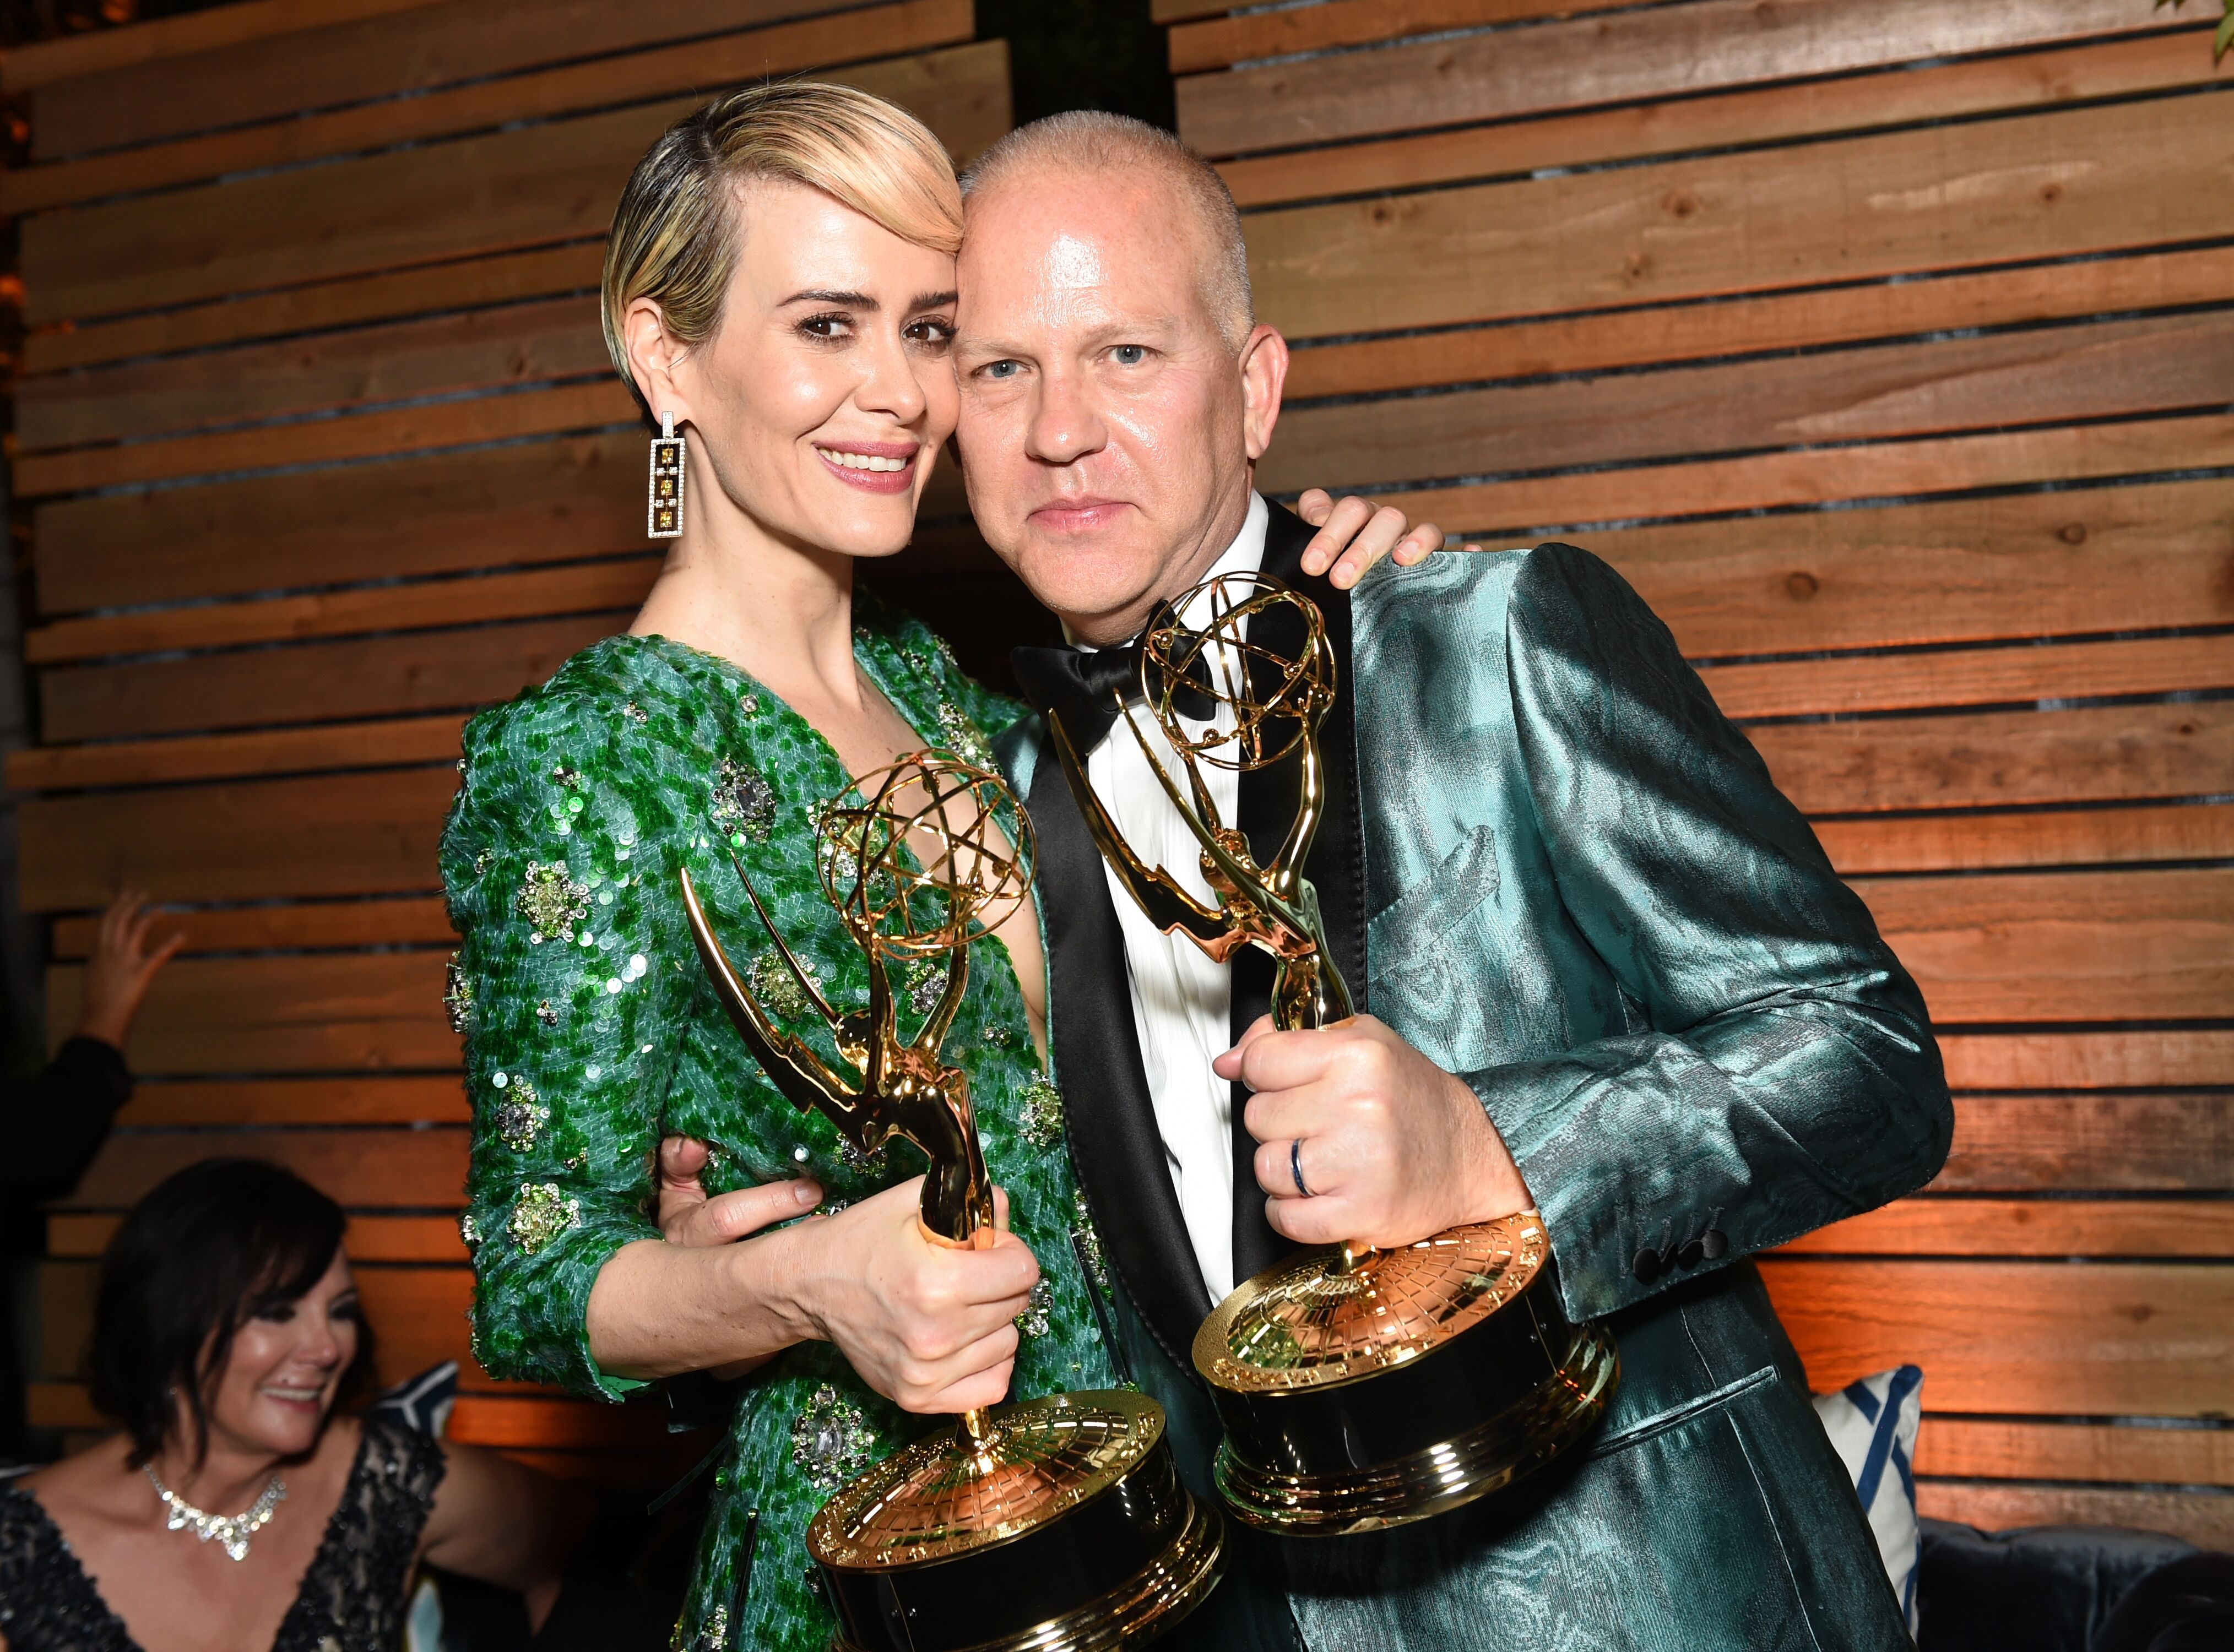 Sarah Paulson and Ryan Murphy attends the FOX Broadcasting Company, FX, National Geographic And Twentieth Century Fox Television's 68th Primetime Emmy Awards. | Source: Getty Images